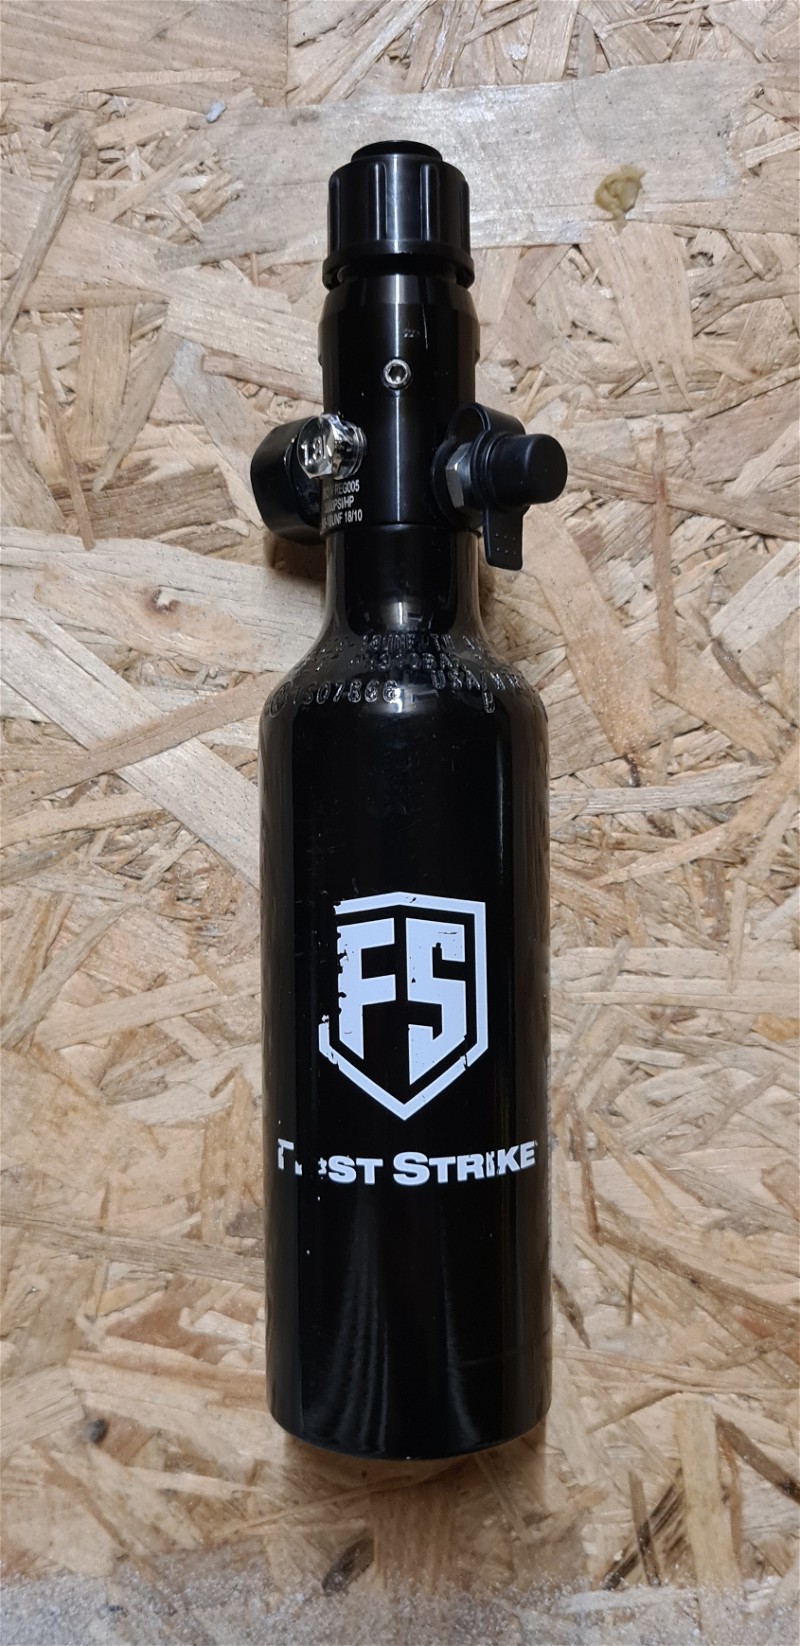 Image 1 for First strike 0,2L HPA fles - ideaal voor je aerostock